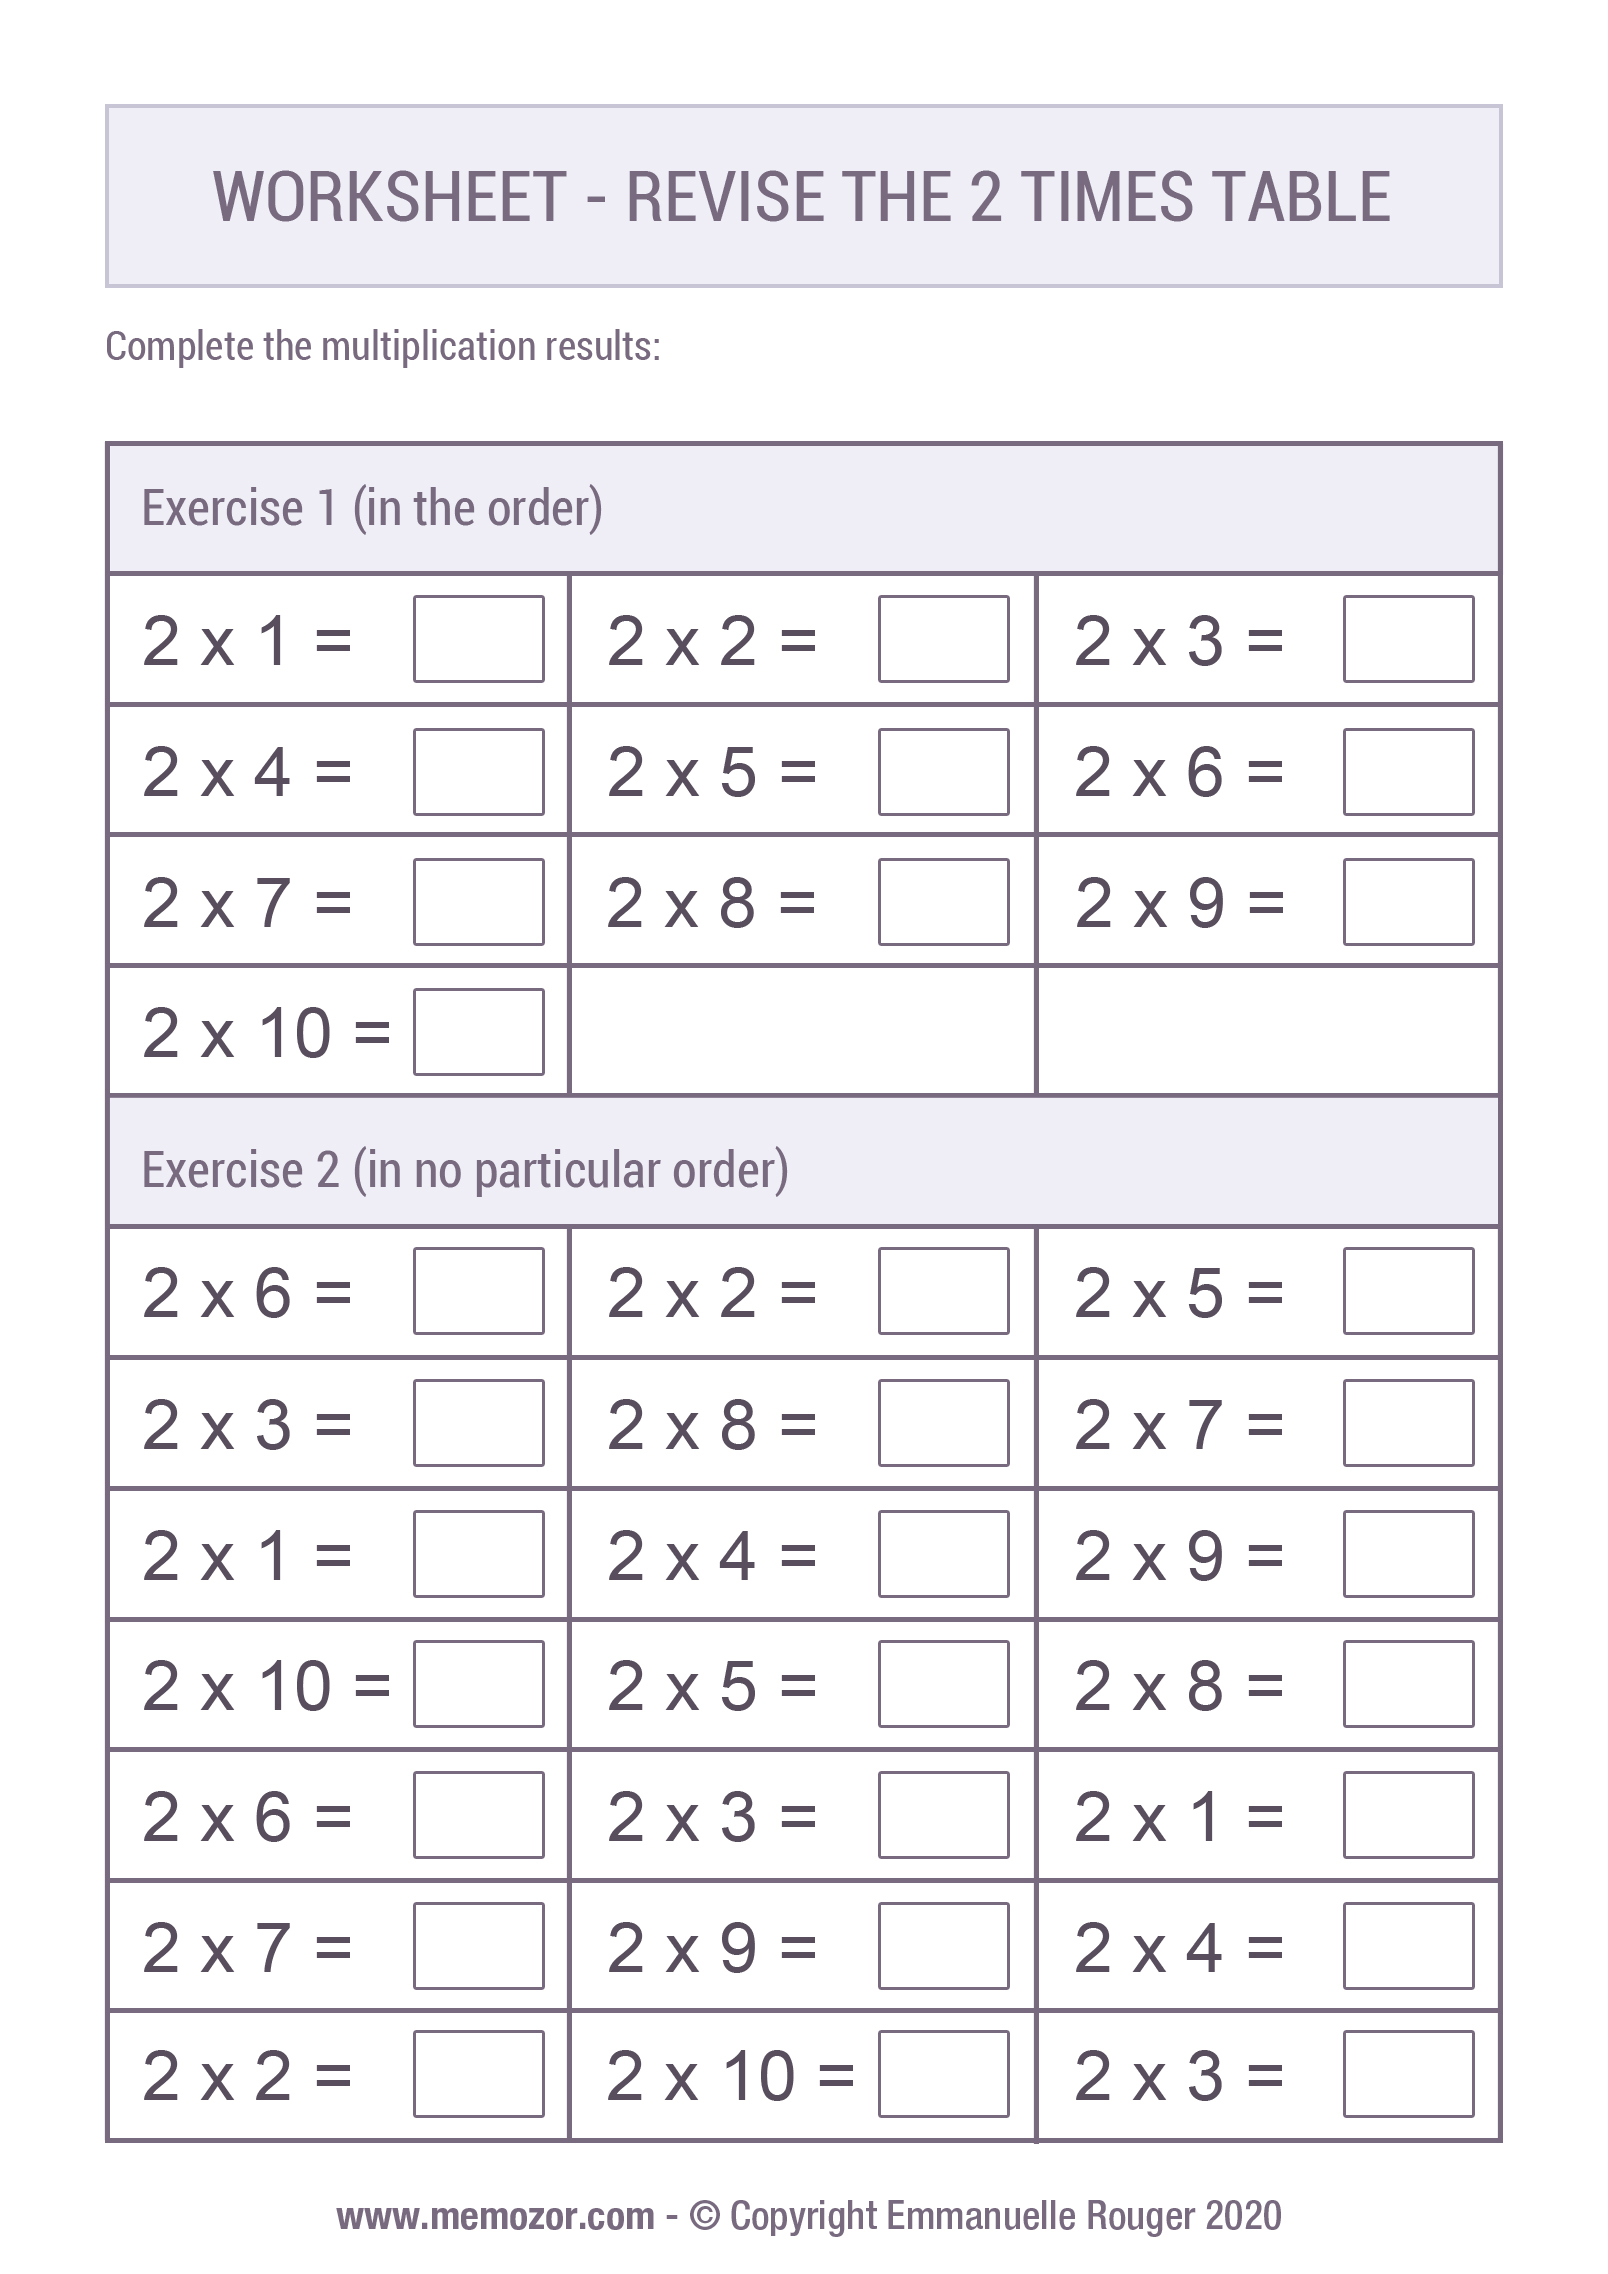 Printable Worksheet - Revise the 25-times Table  Memozor Inside 2 Times Table Worksheet